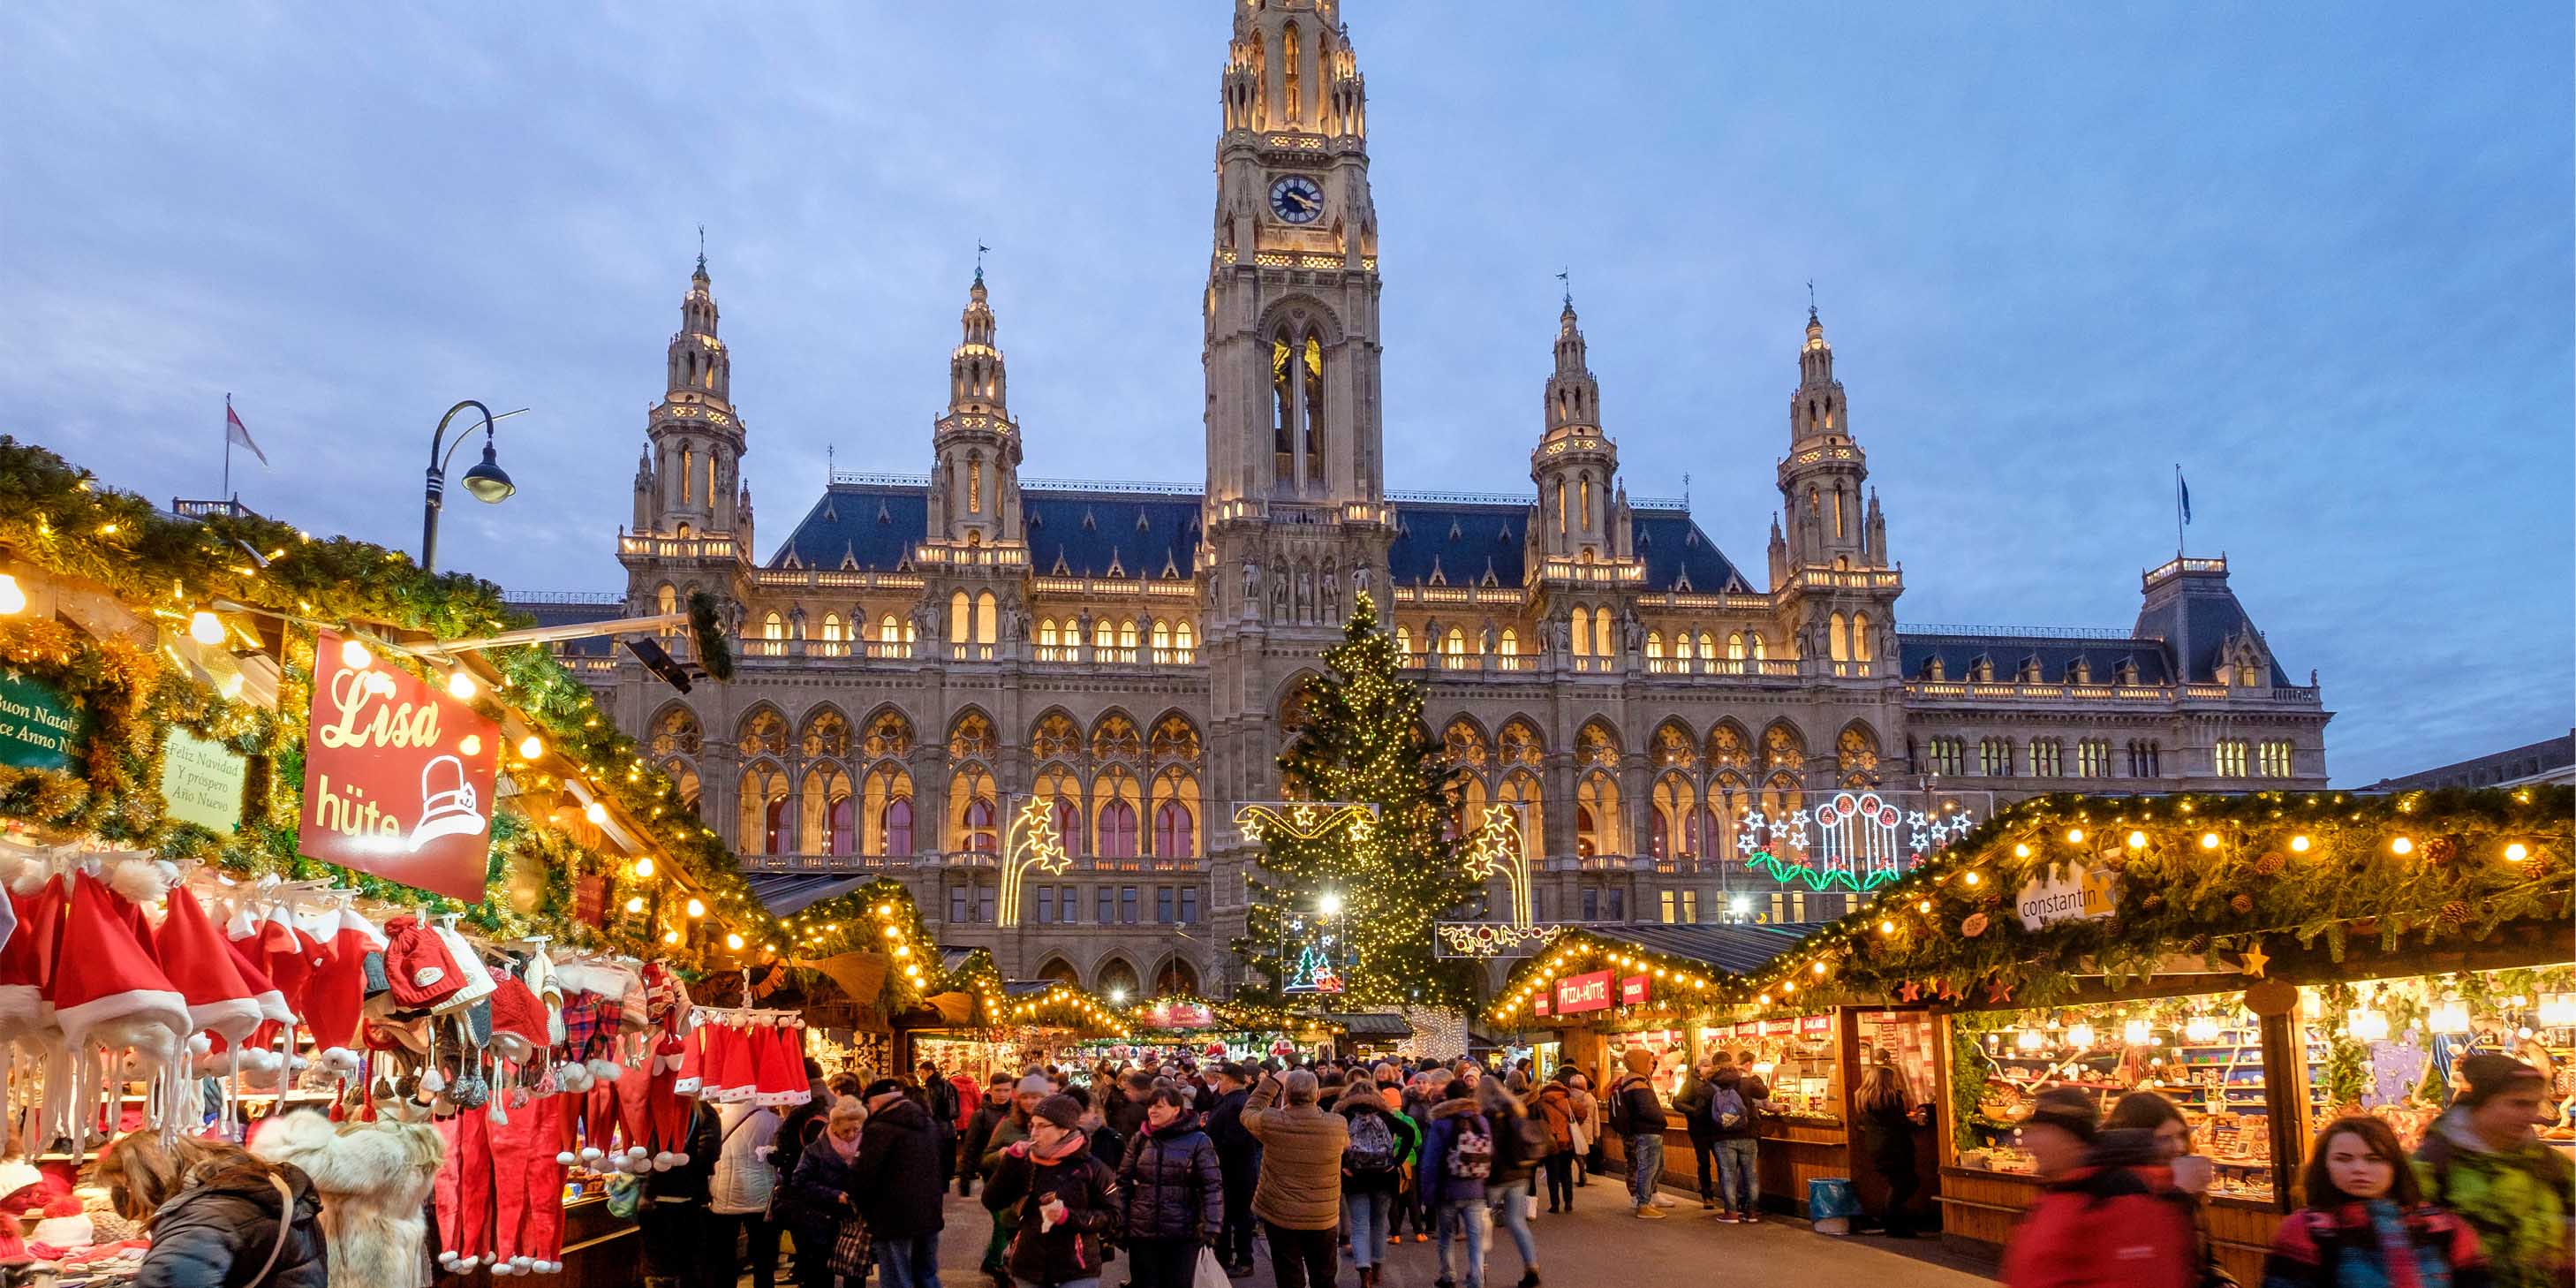 Christmas markets located in front of the Vienna City Hall